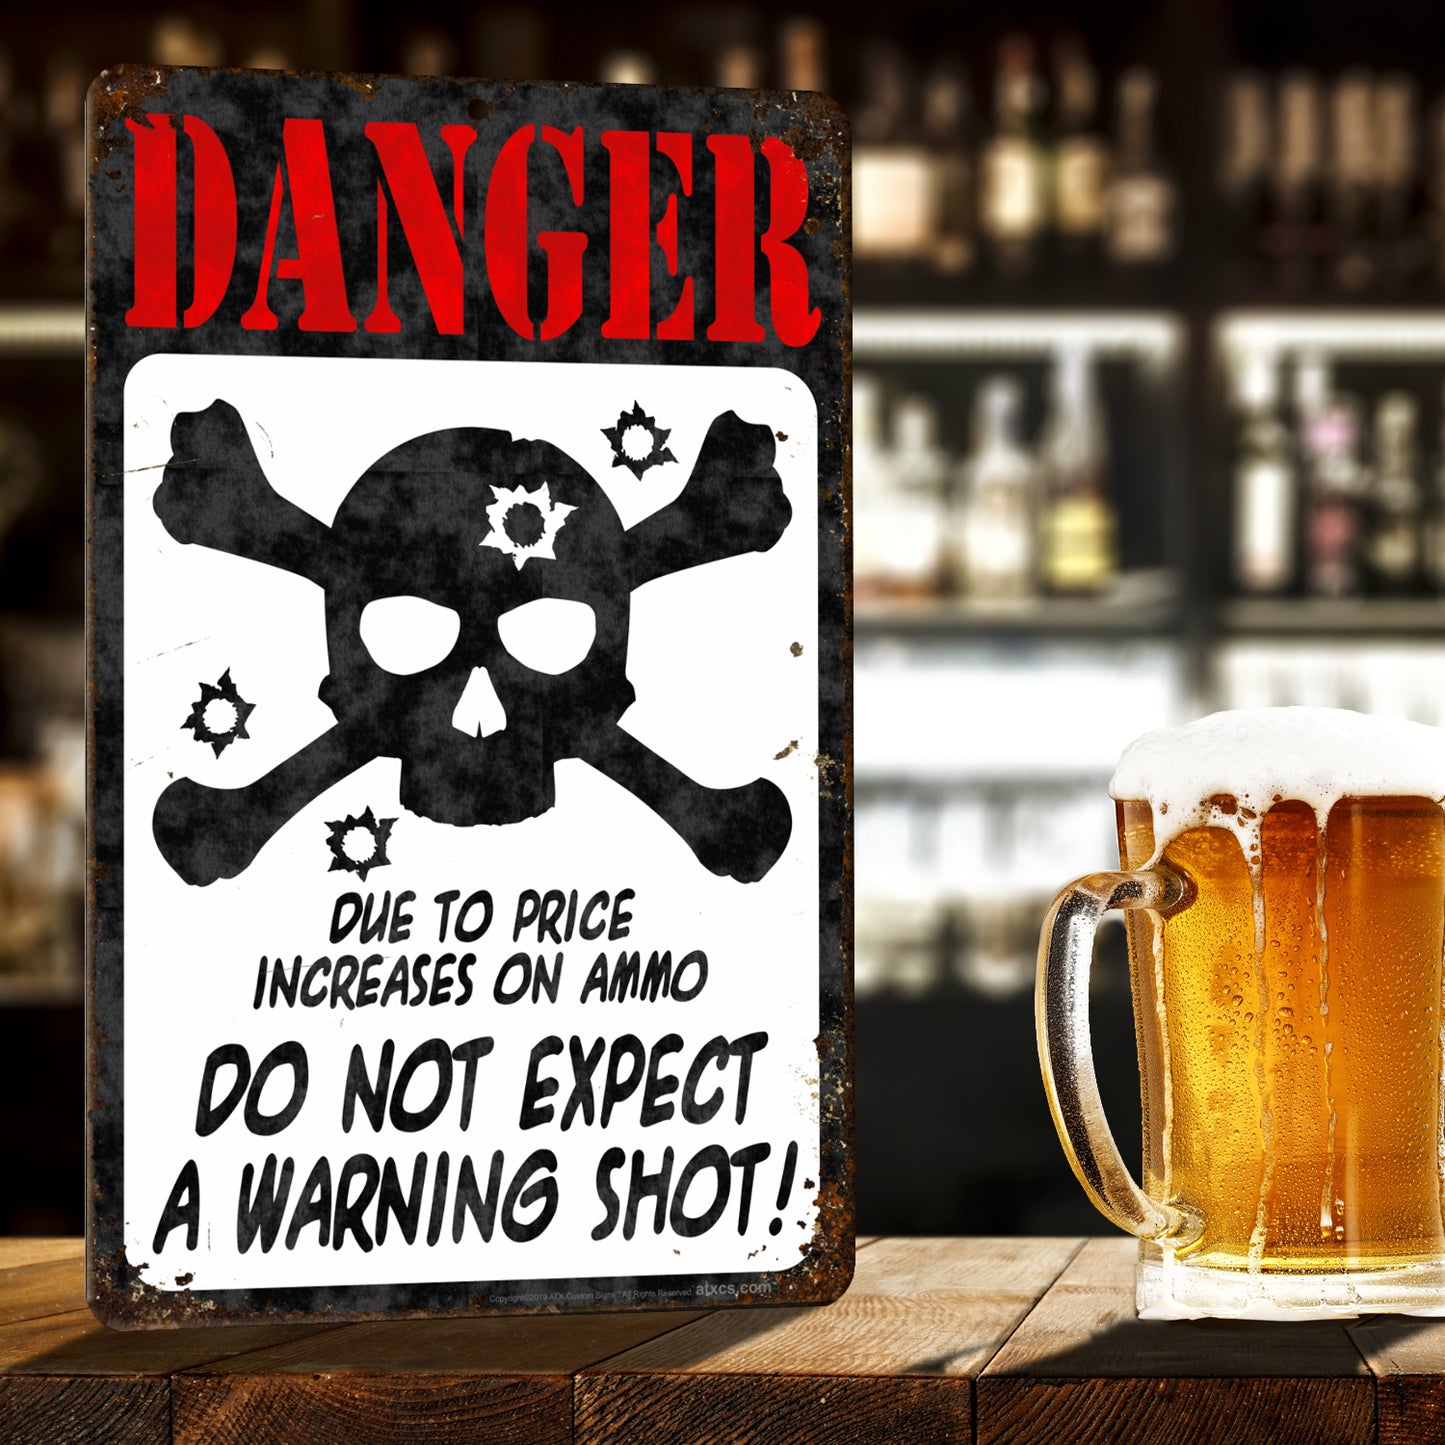 Funny Danger Sign - Danger Due to The Price Increases on Ammo. Do not Expect a Warning Shot! (Antique Looking Sign) - Size 8 x 12